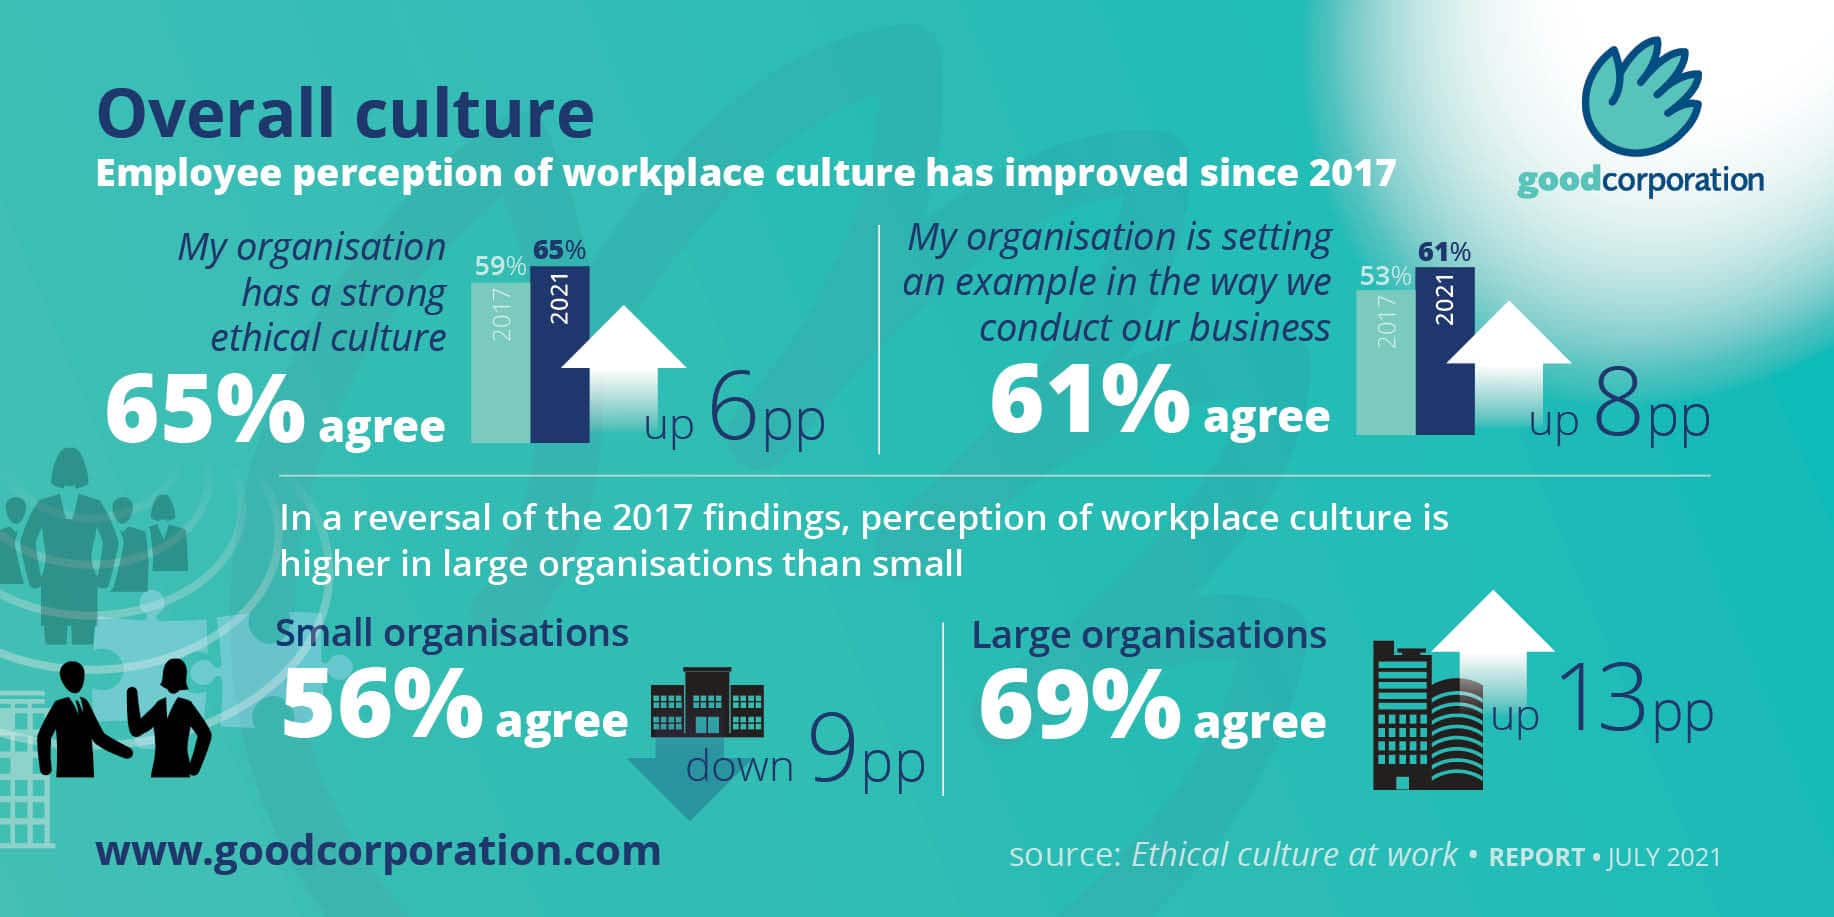 Employee perception of workplace culture has improved according to the 2021 GoodCorporation survey of workplace perceptions of culture